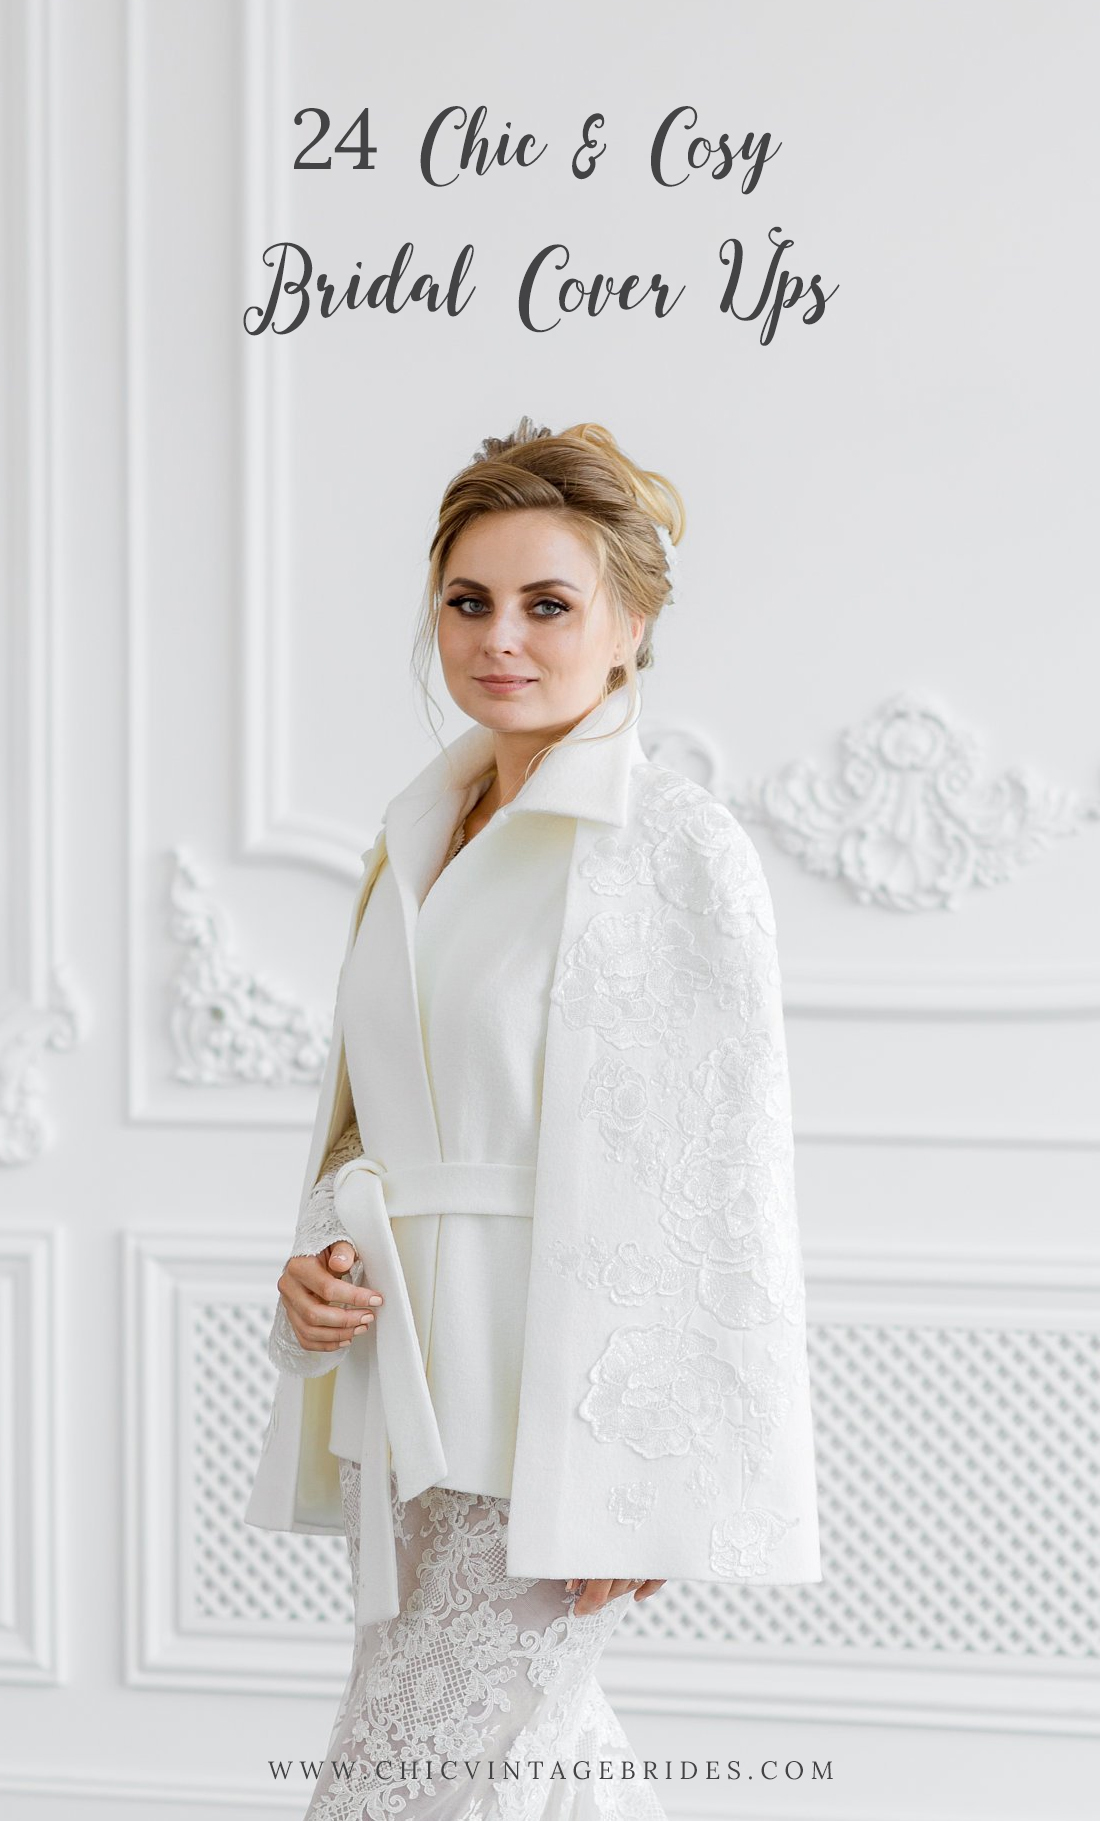 24 Chic & Cosy Bridal Cover Ups